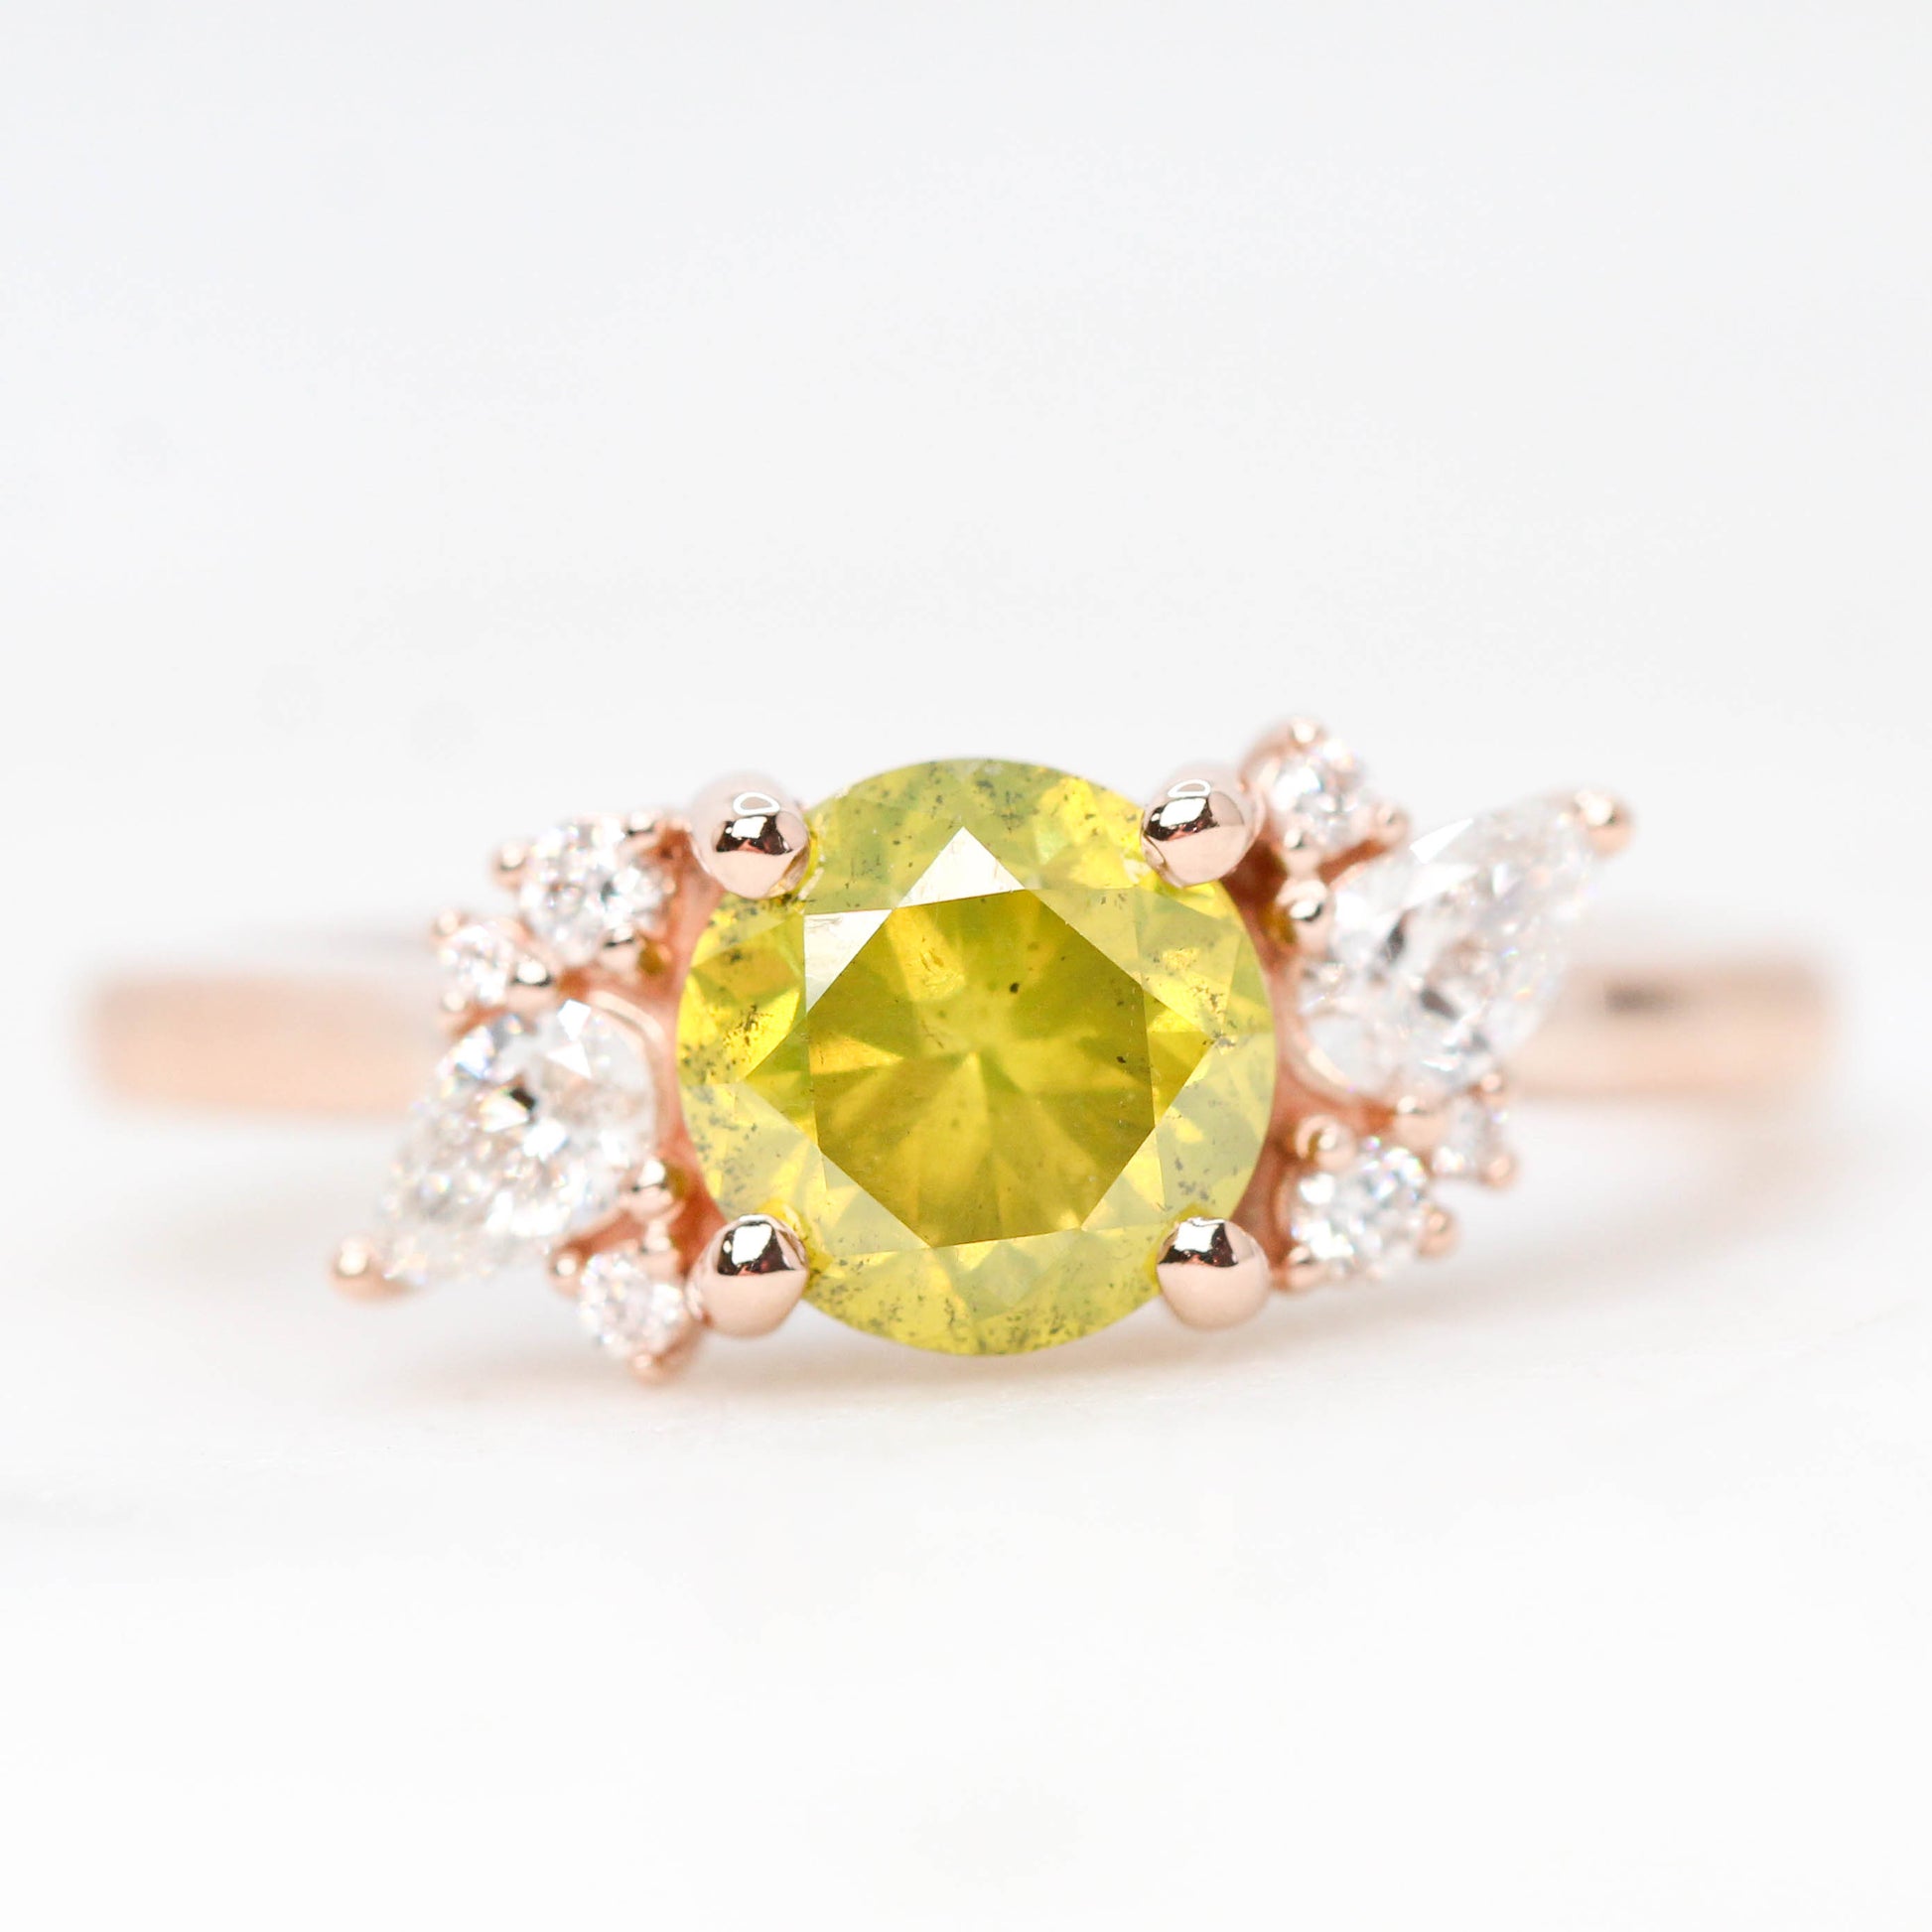 Sable Ring with a 1.38 Carat Yellow-Green Round Diamond with White Accent Diamonds in 14k Rose Gold - Ready to Size and Ship - Midwinter Co. Alternative Bridal Rings and Modern Fine Jewelry